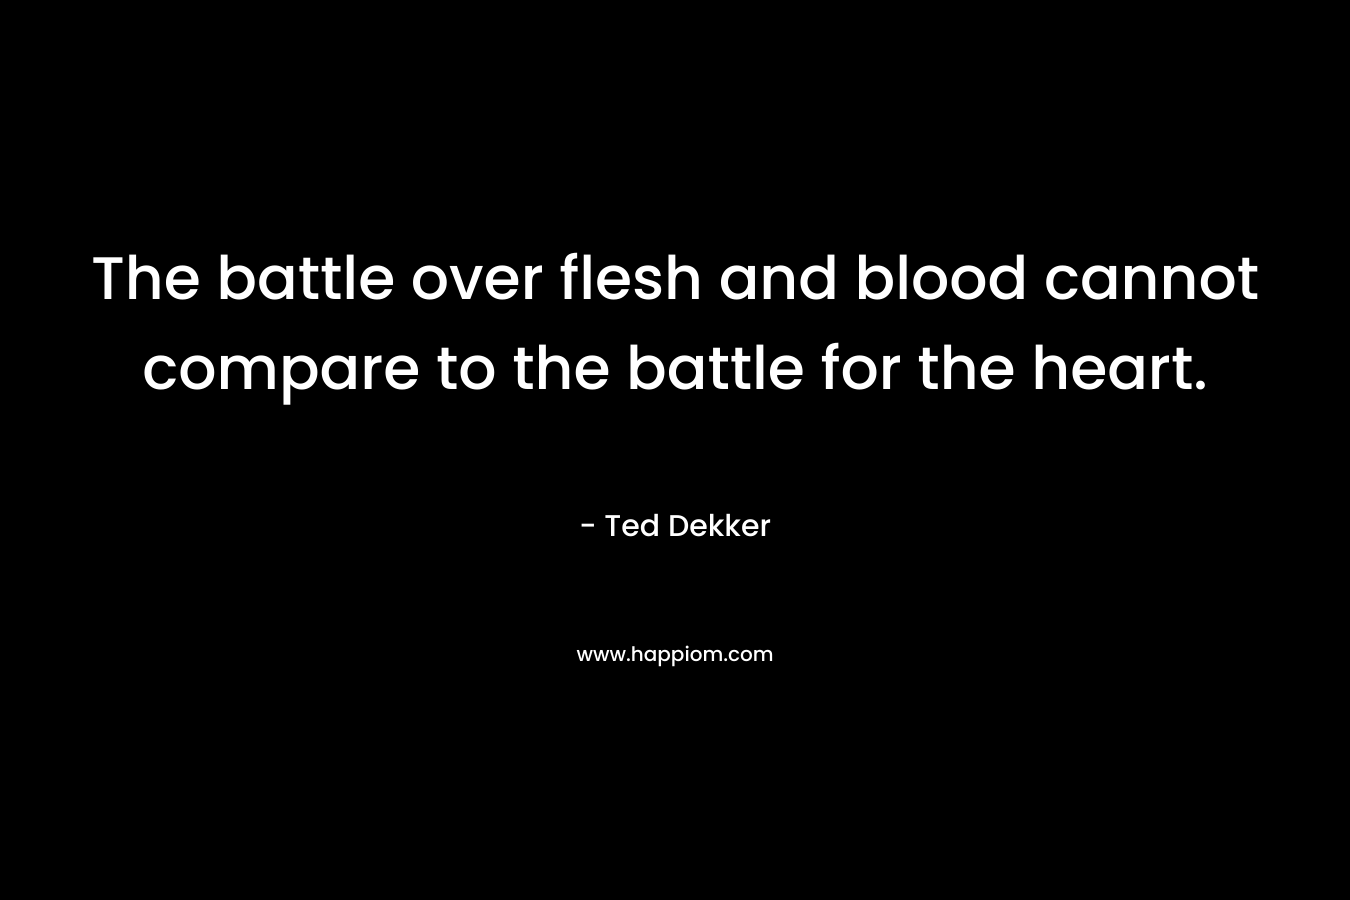 The battle over flesh and blood cannot compare to the battle for the heart. – Ted Dekker